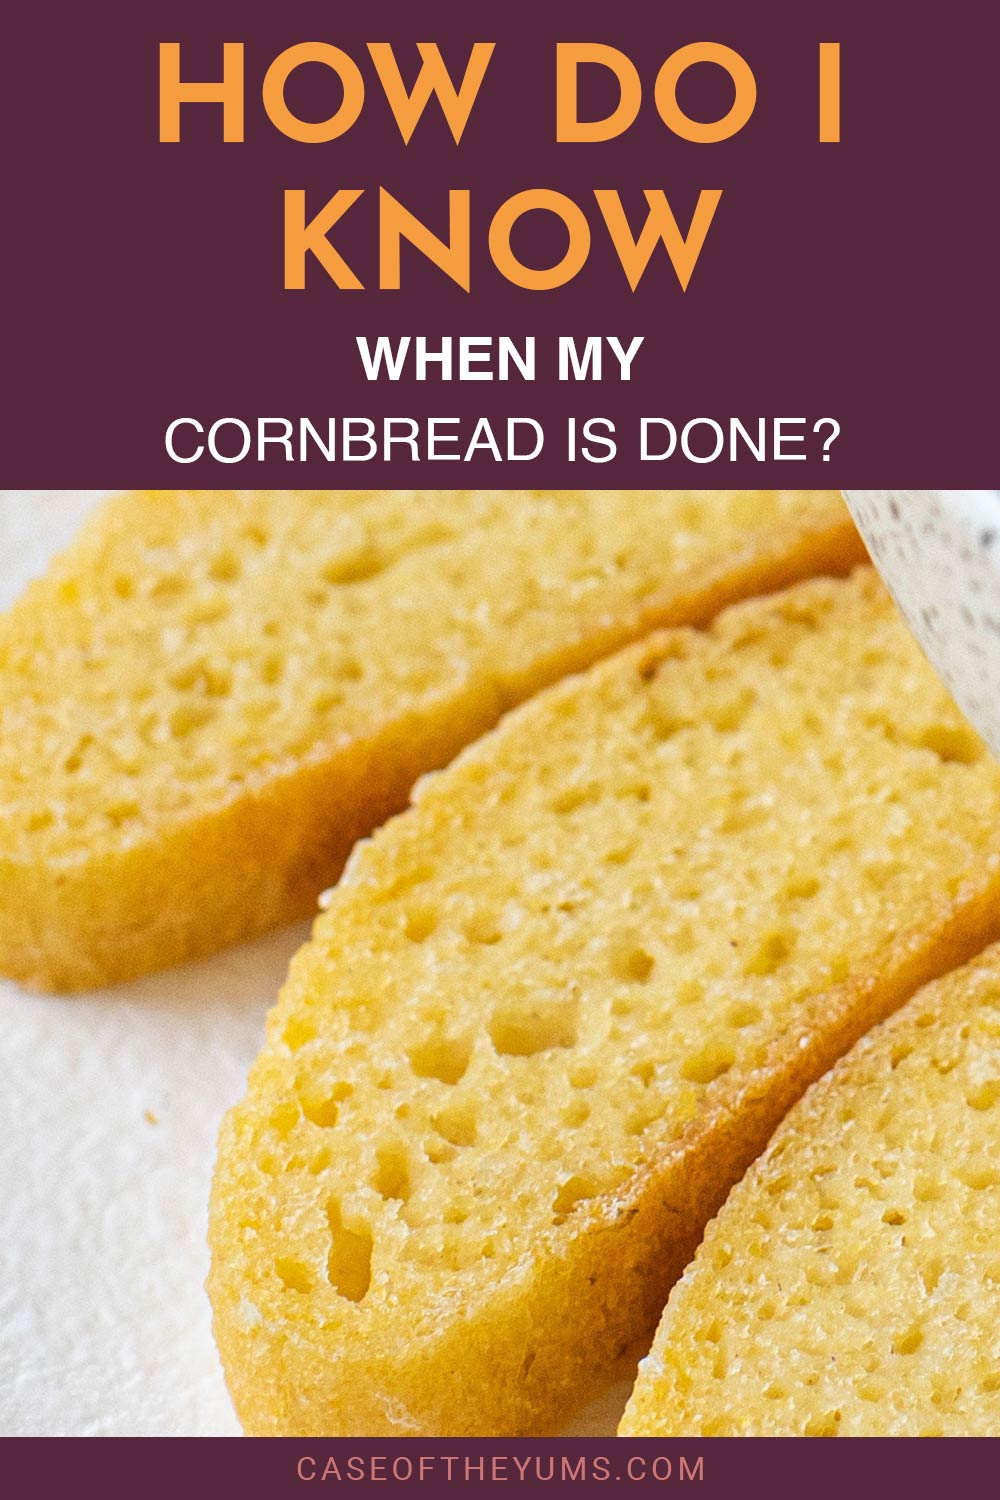 Cornbread slices - how do I know when it's done?